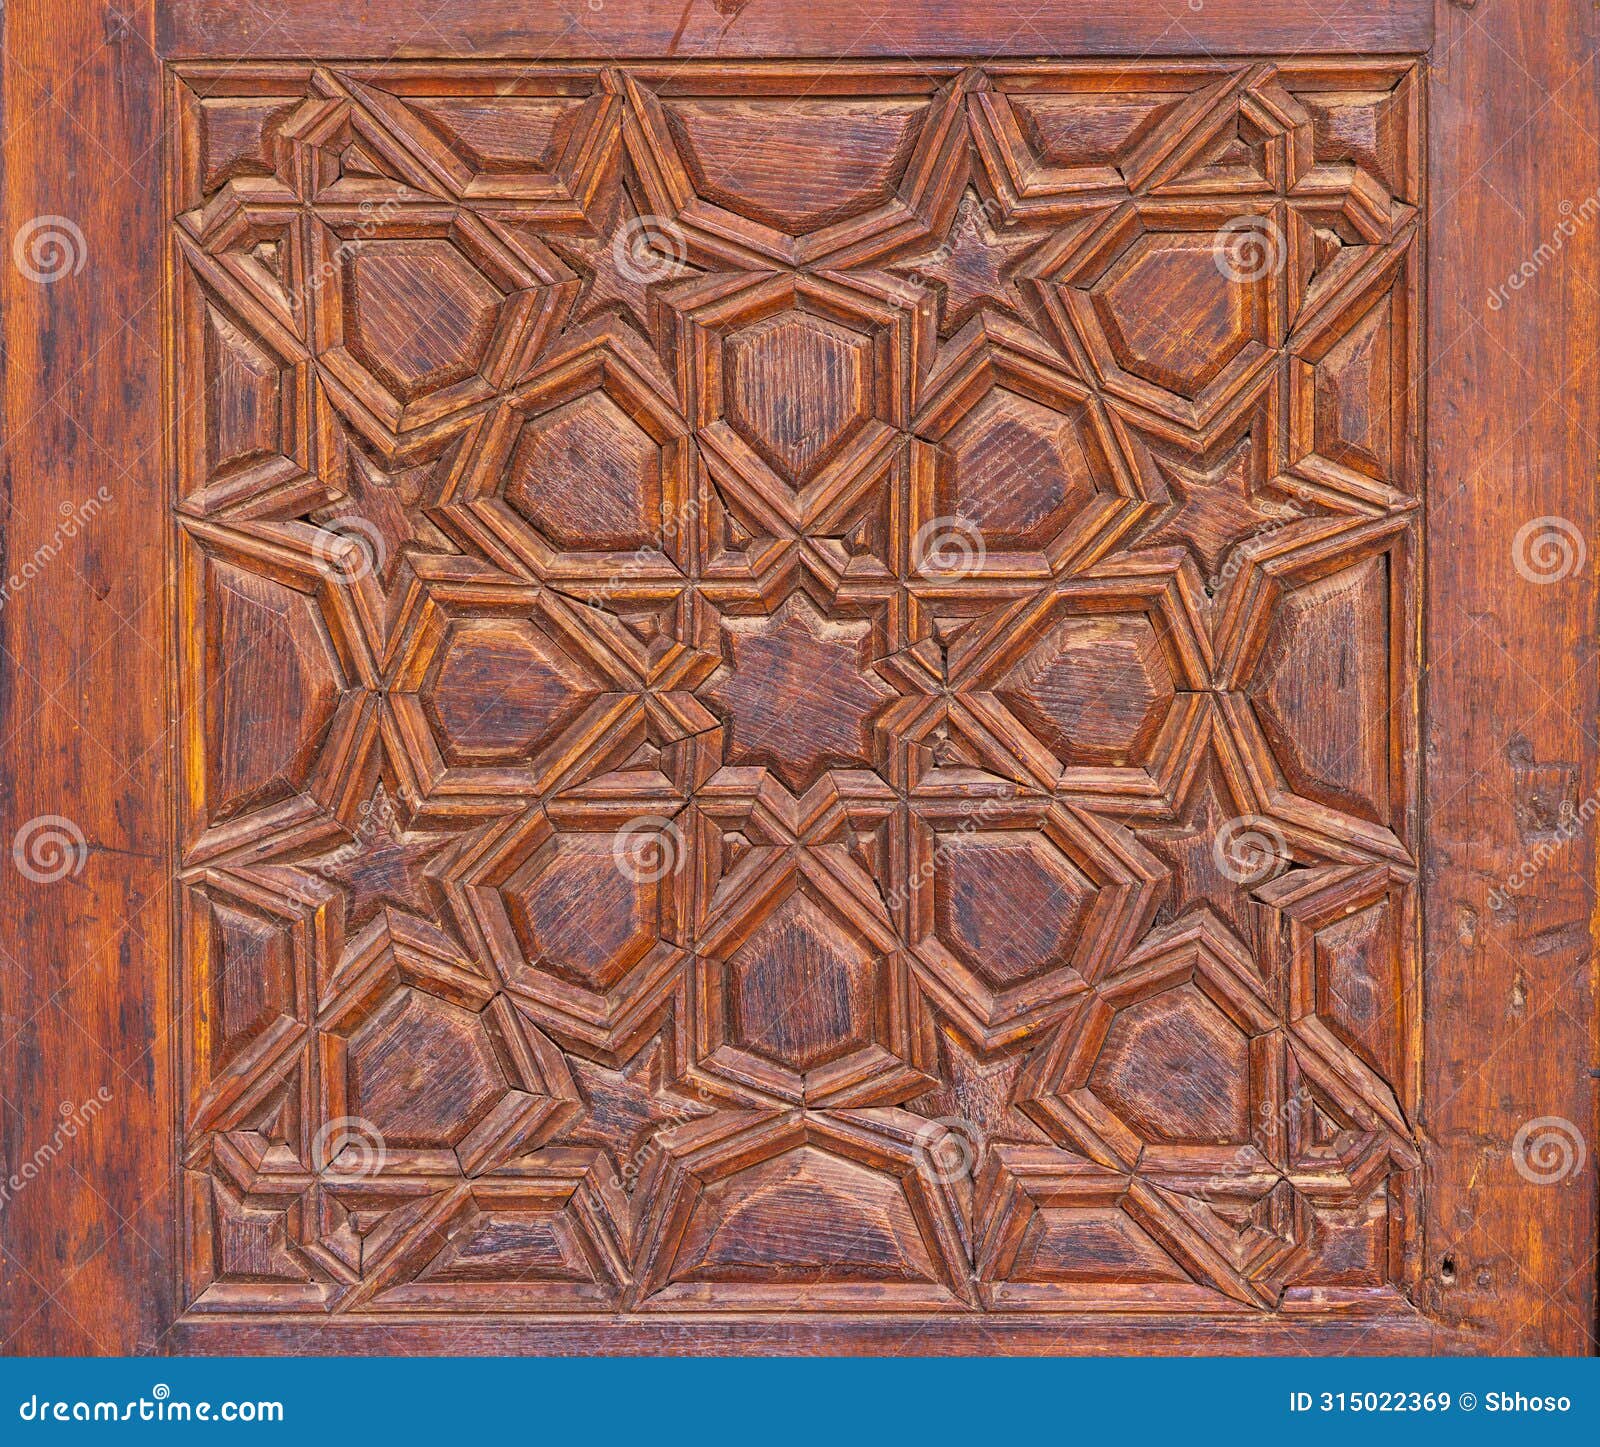 high res intricate arabesque intense wood relief extreme close up in cairo, egypt